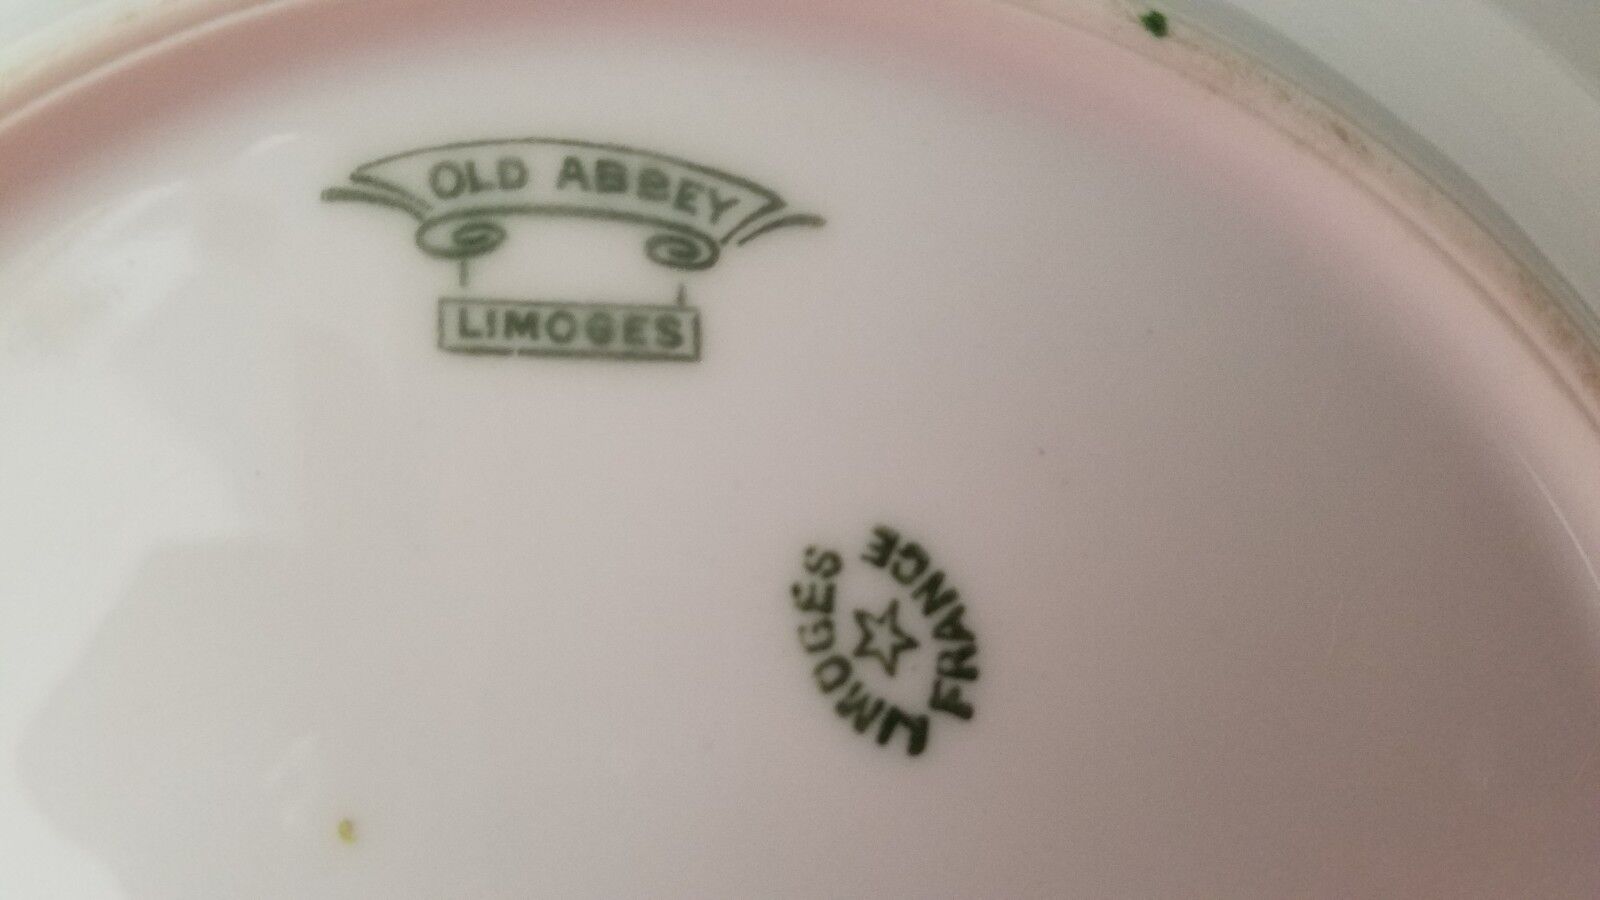 Old Abbey Limoges Marks